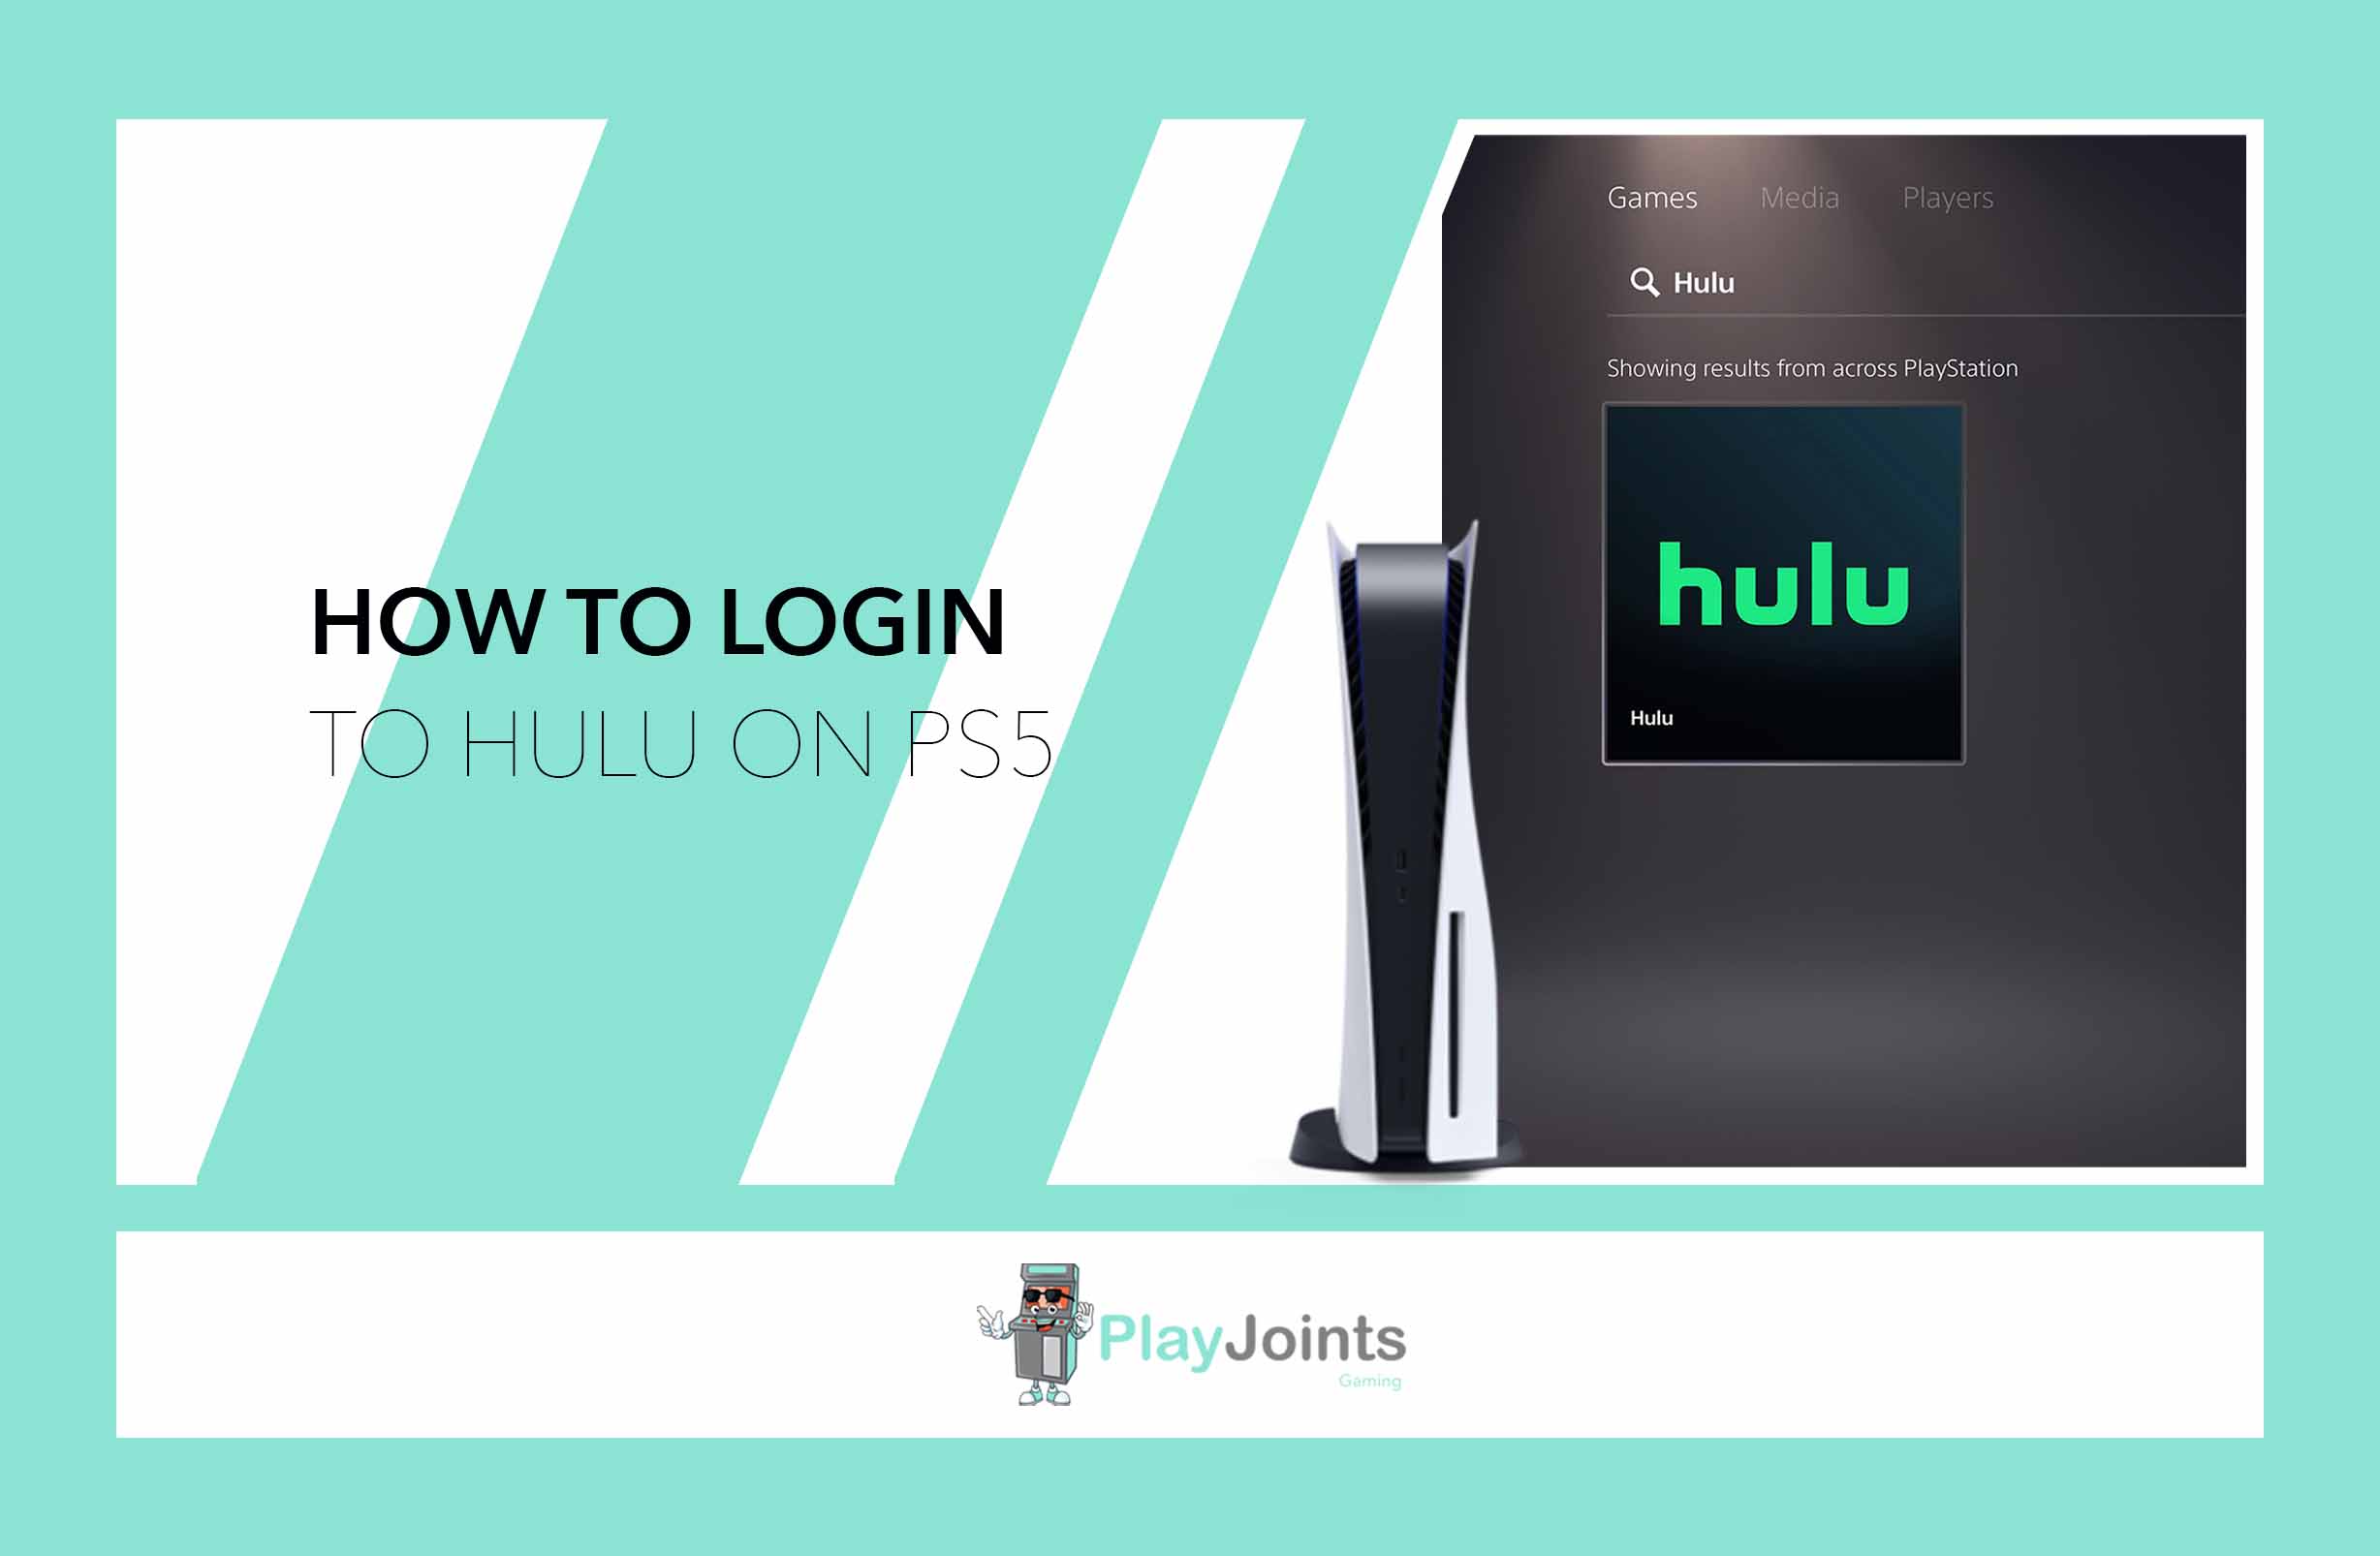 How to Login to Hulu on PS5